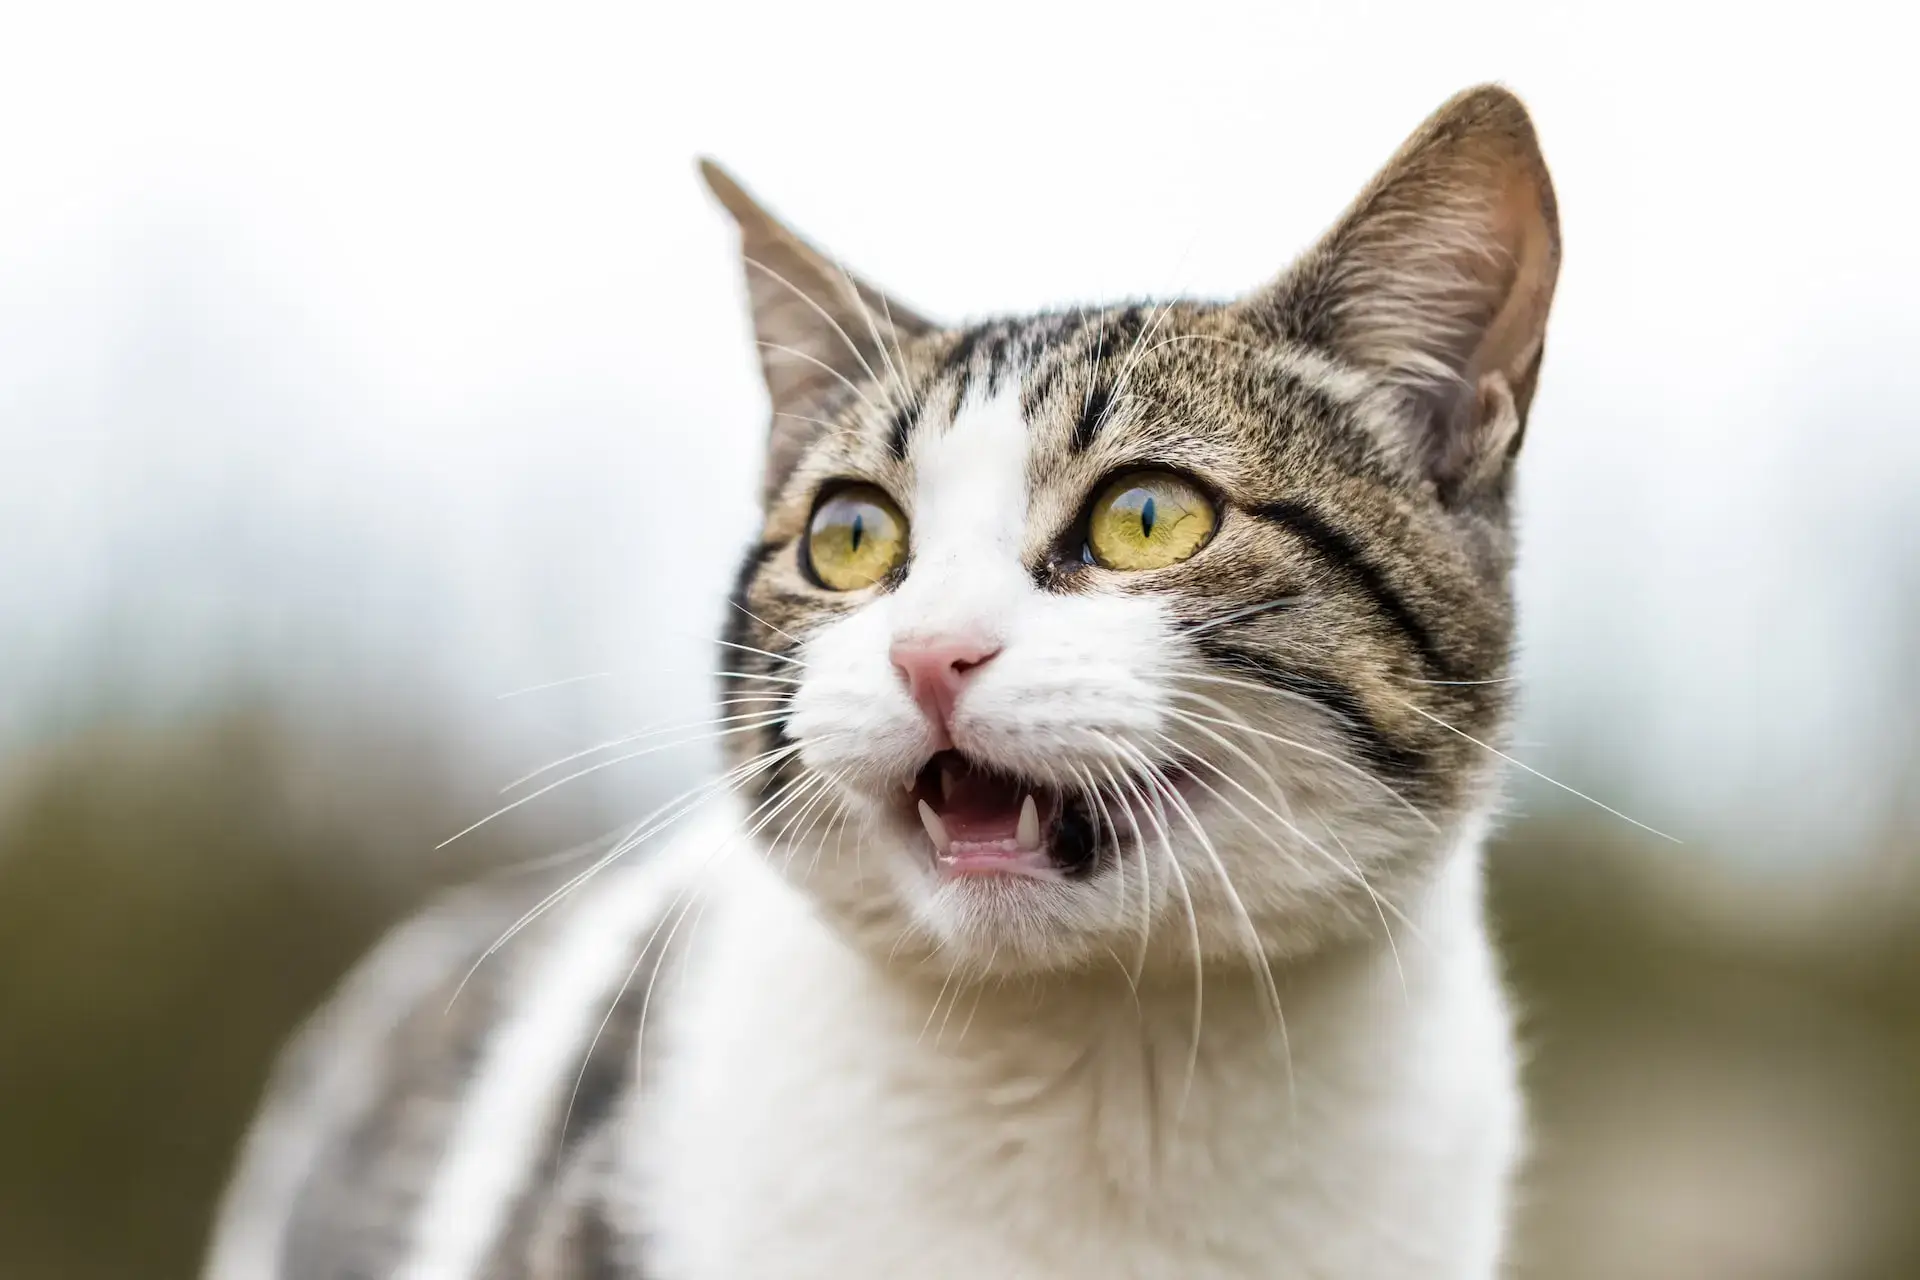 Scaredy Cat: Feline Anxiety and Related Issues - Animal Medical